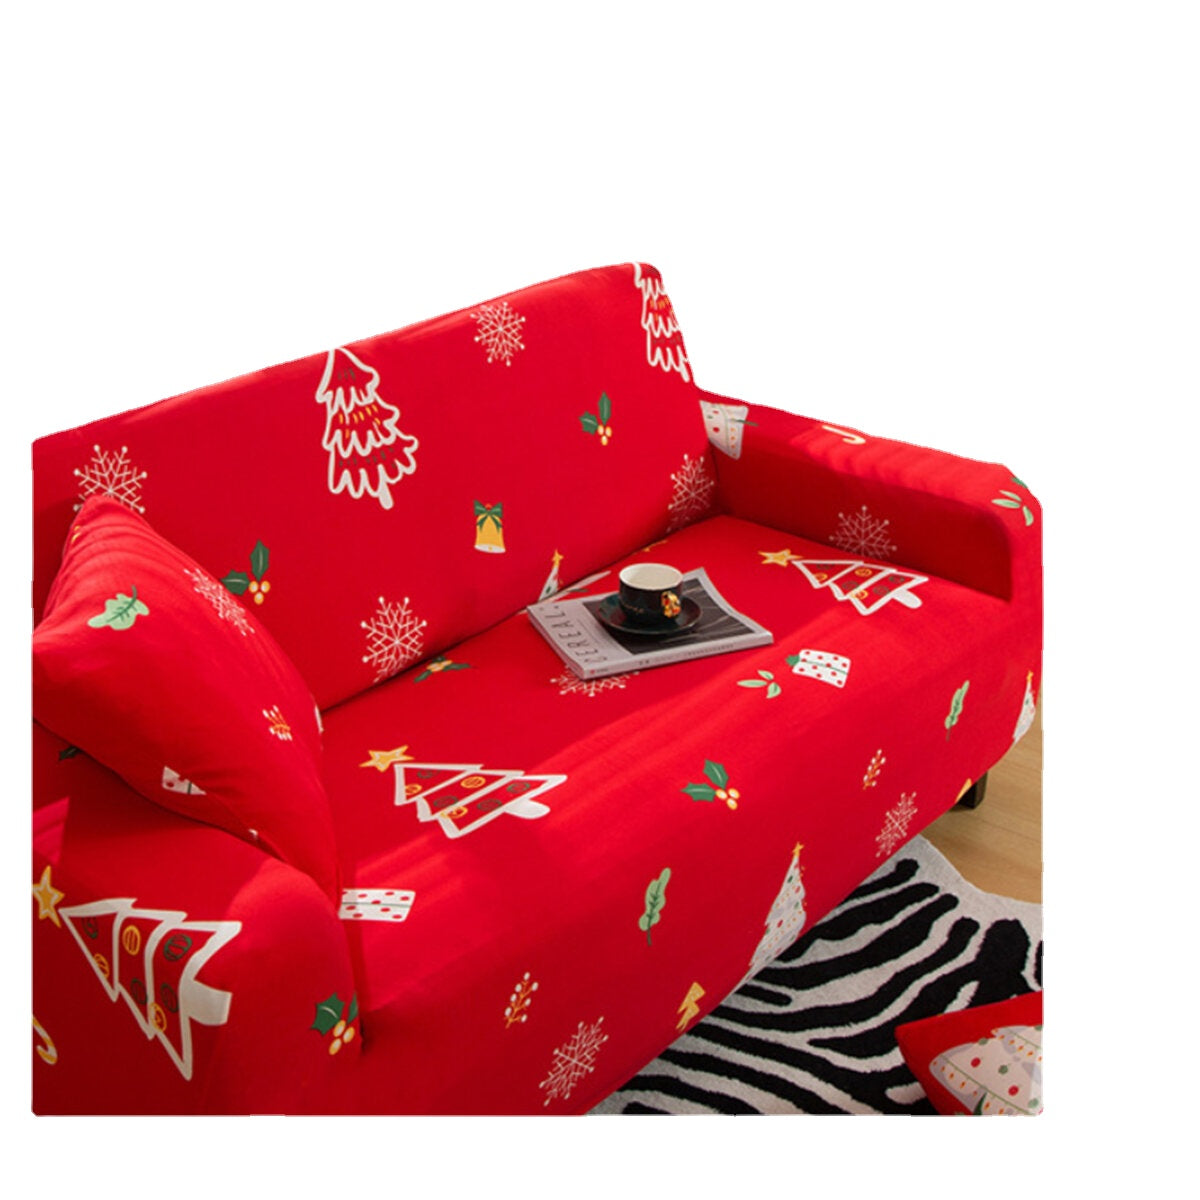 1/2/3/4 Seater Christmas Sofa Cover Elastic Chair Seat Protector Stretch Slipcover Home Office Furniture Accessories Decorations